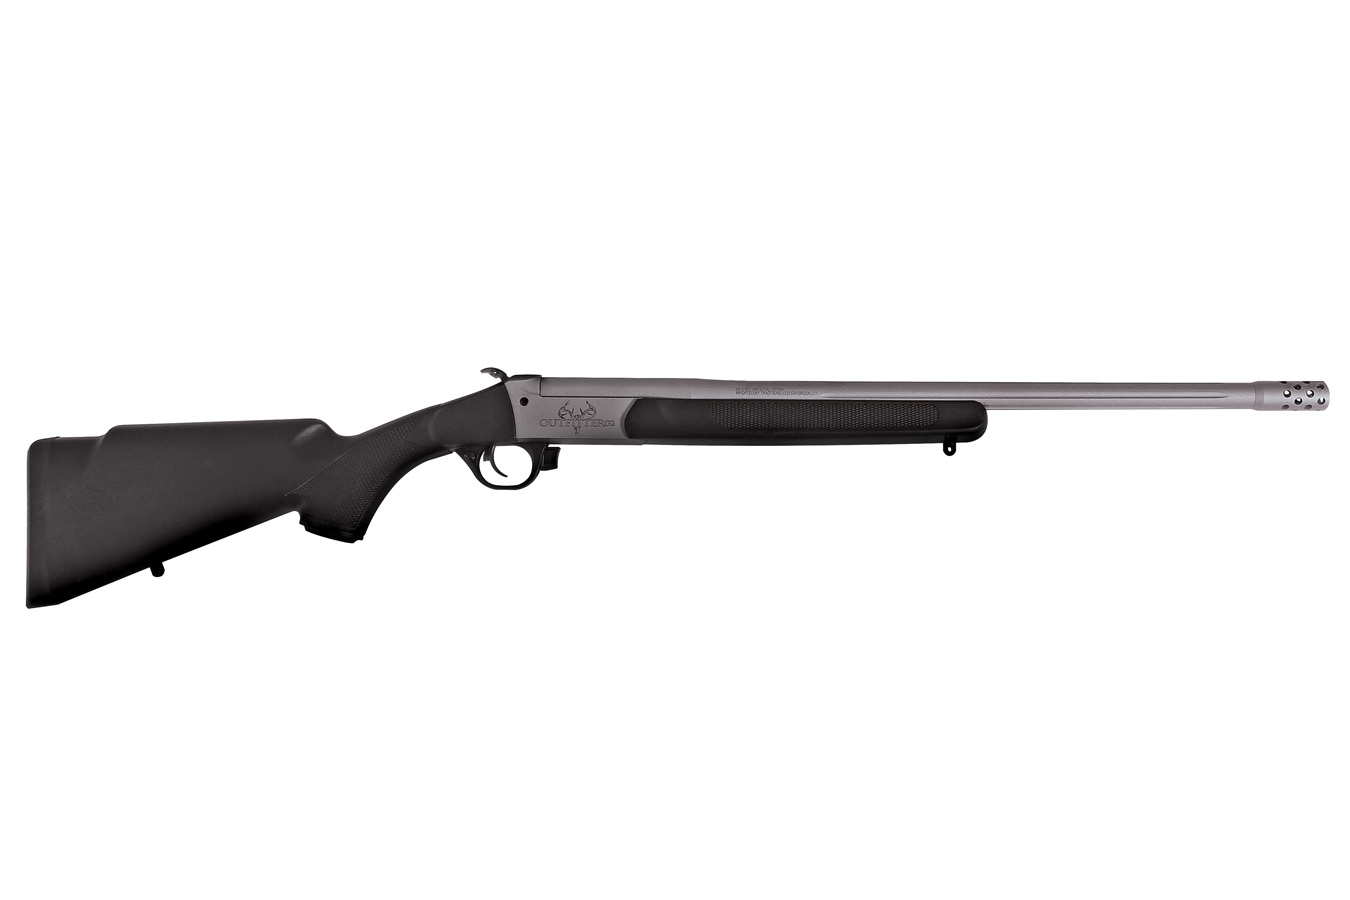 TRADITIONS OUTFITTER G2 450 BUSHMASTER SINGLE SHOT BLK